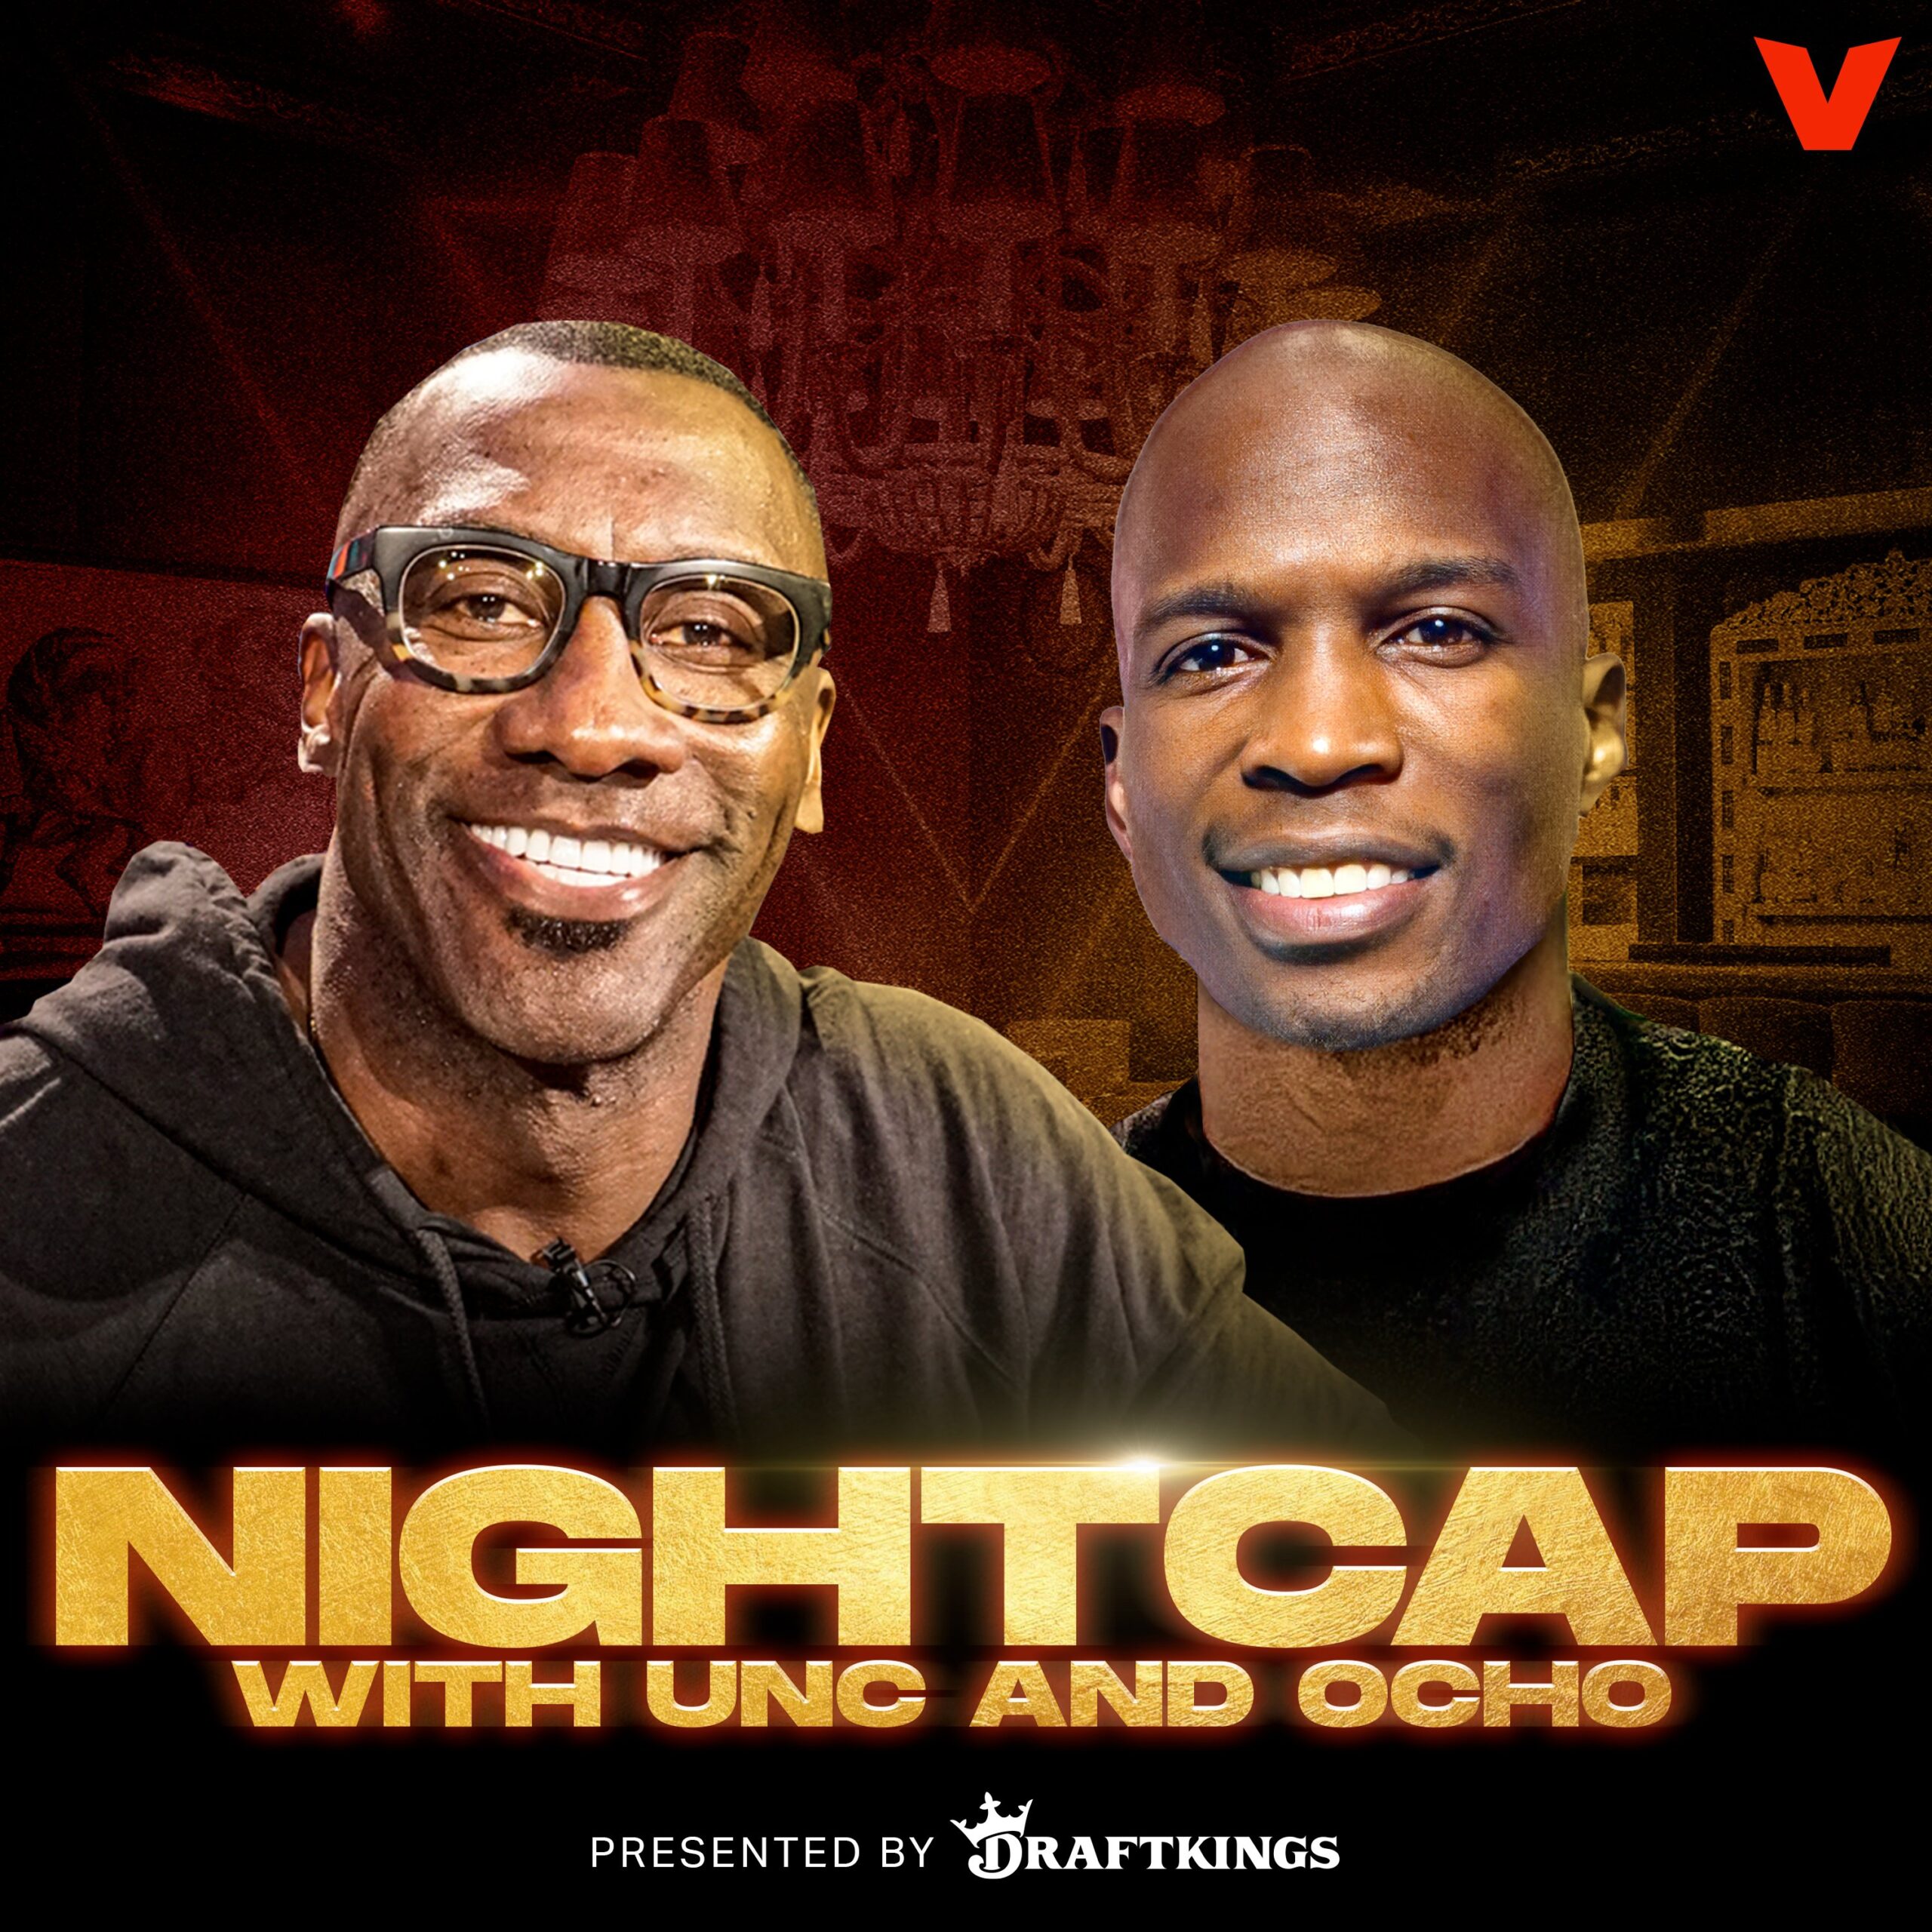 Chad ‘Ochocinco’ Johnson, a former star receiver, and Shannon Sharpe have announced a new show